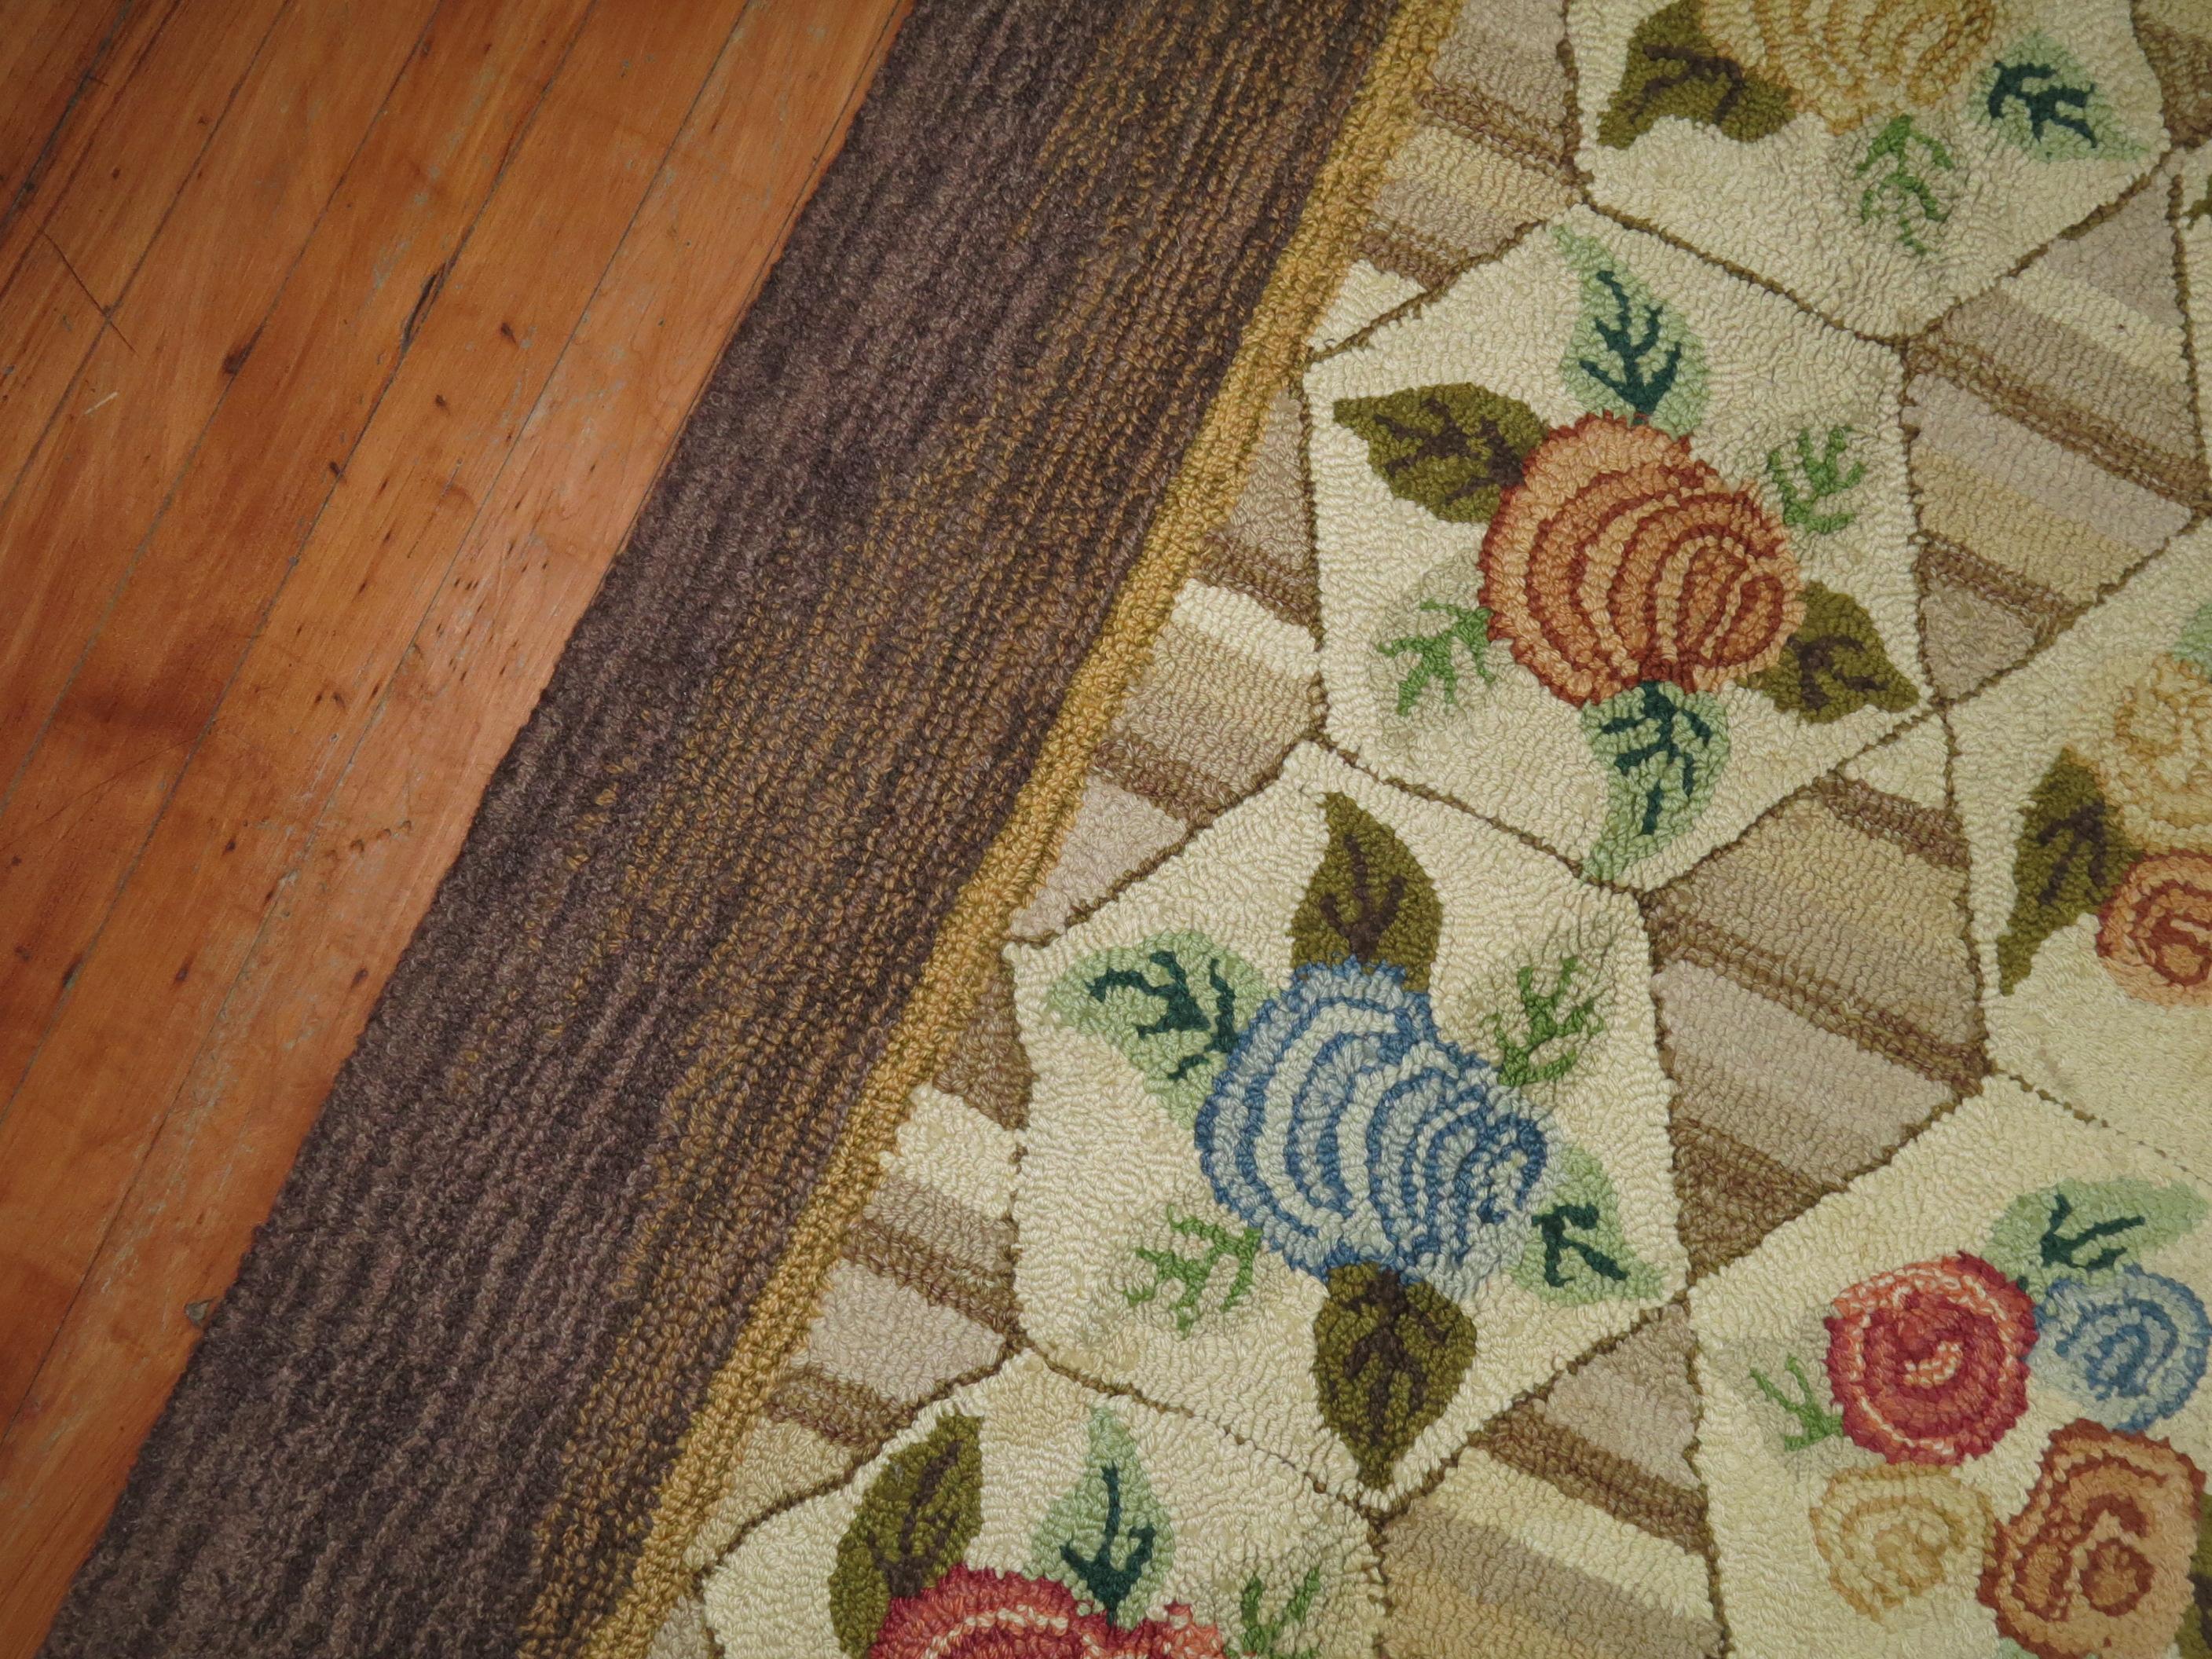 Hand-Knotted Rustic Color Floral Motif American Hooked Room Size Rug, Mid-20th Century For Sale